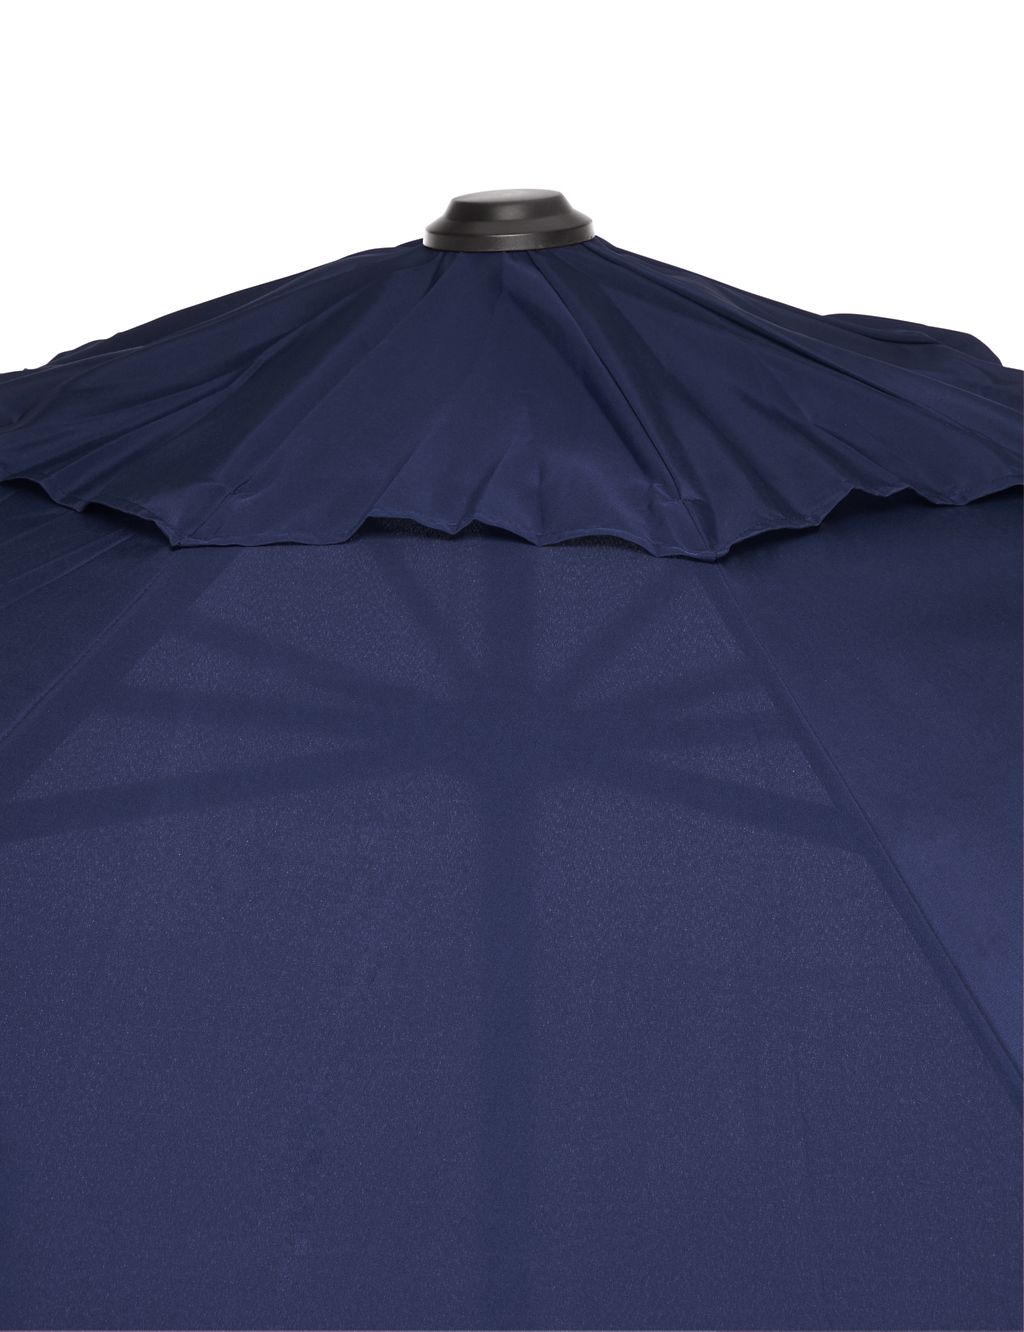 Navy Parasol with Black Pole 6 of 7